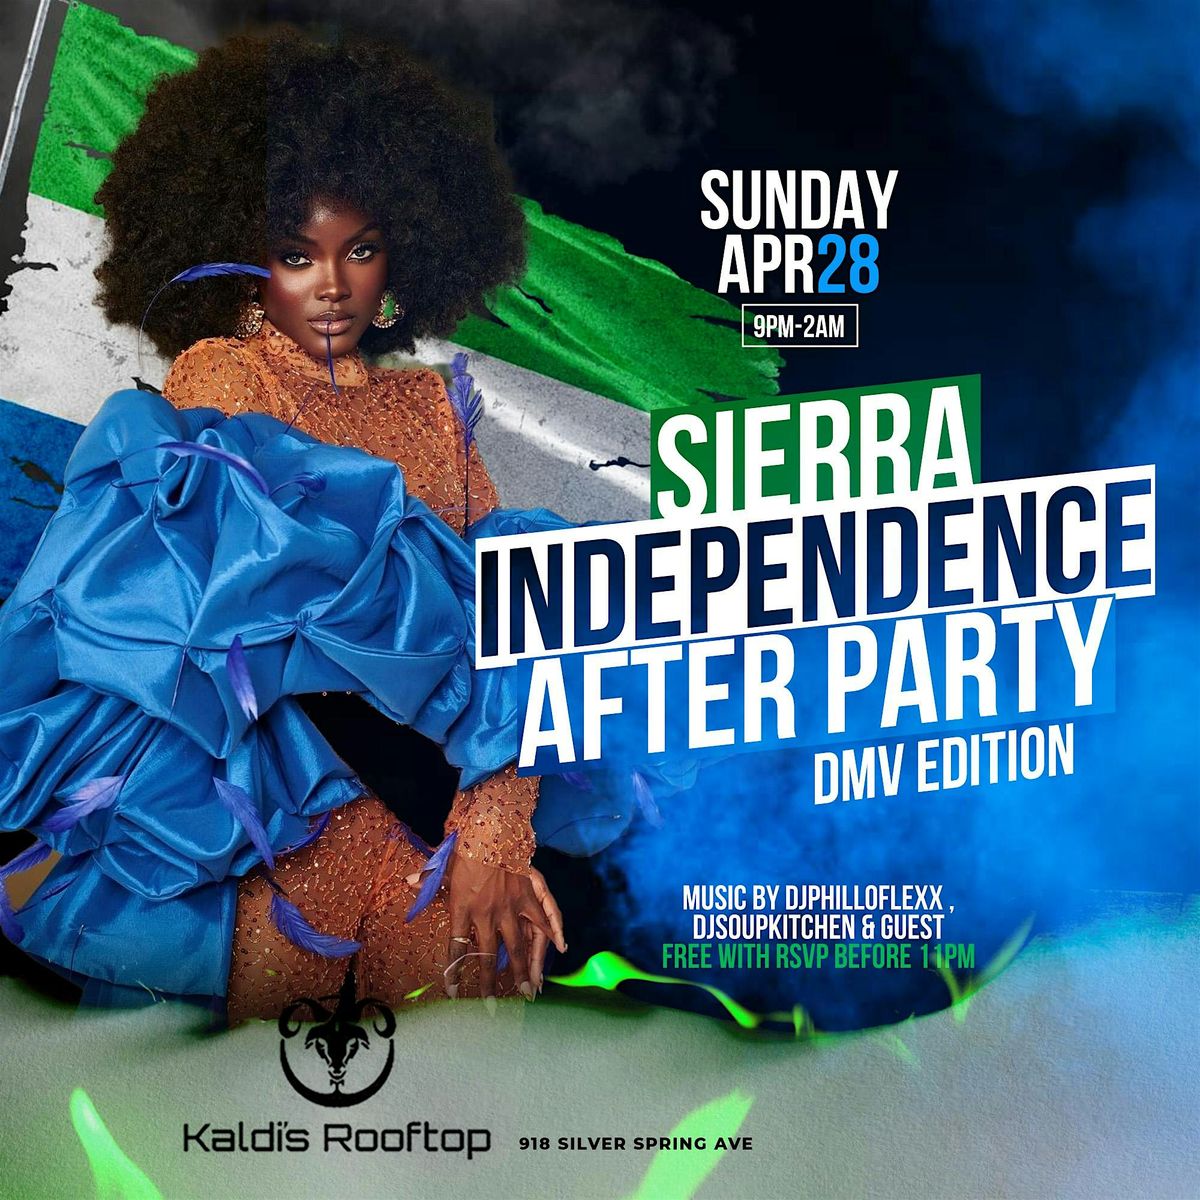 Sierra Leone Independence After Party @ Warehouse (DMV Edition)